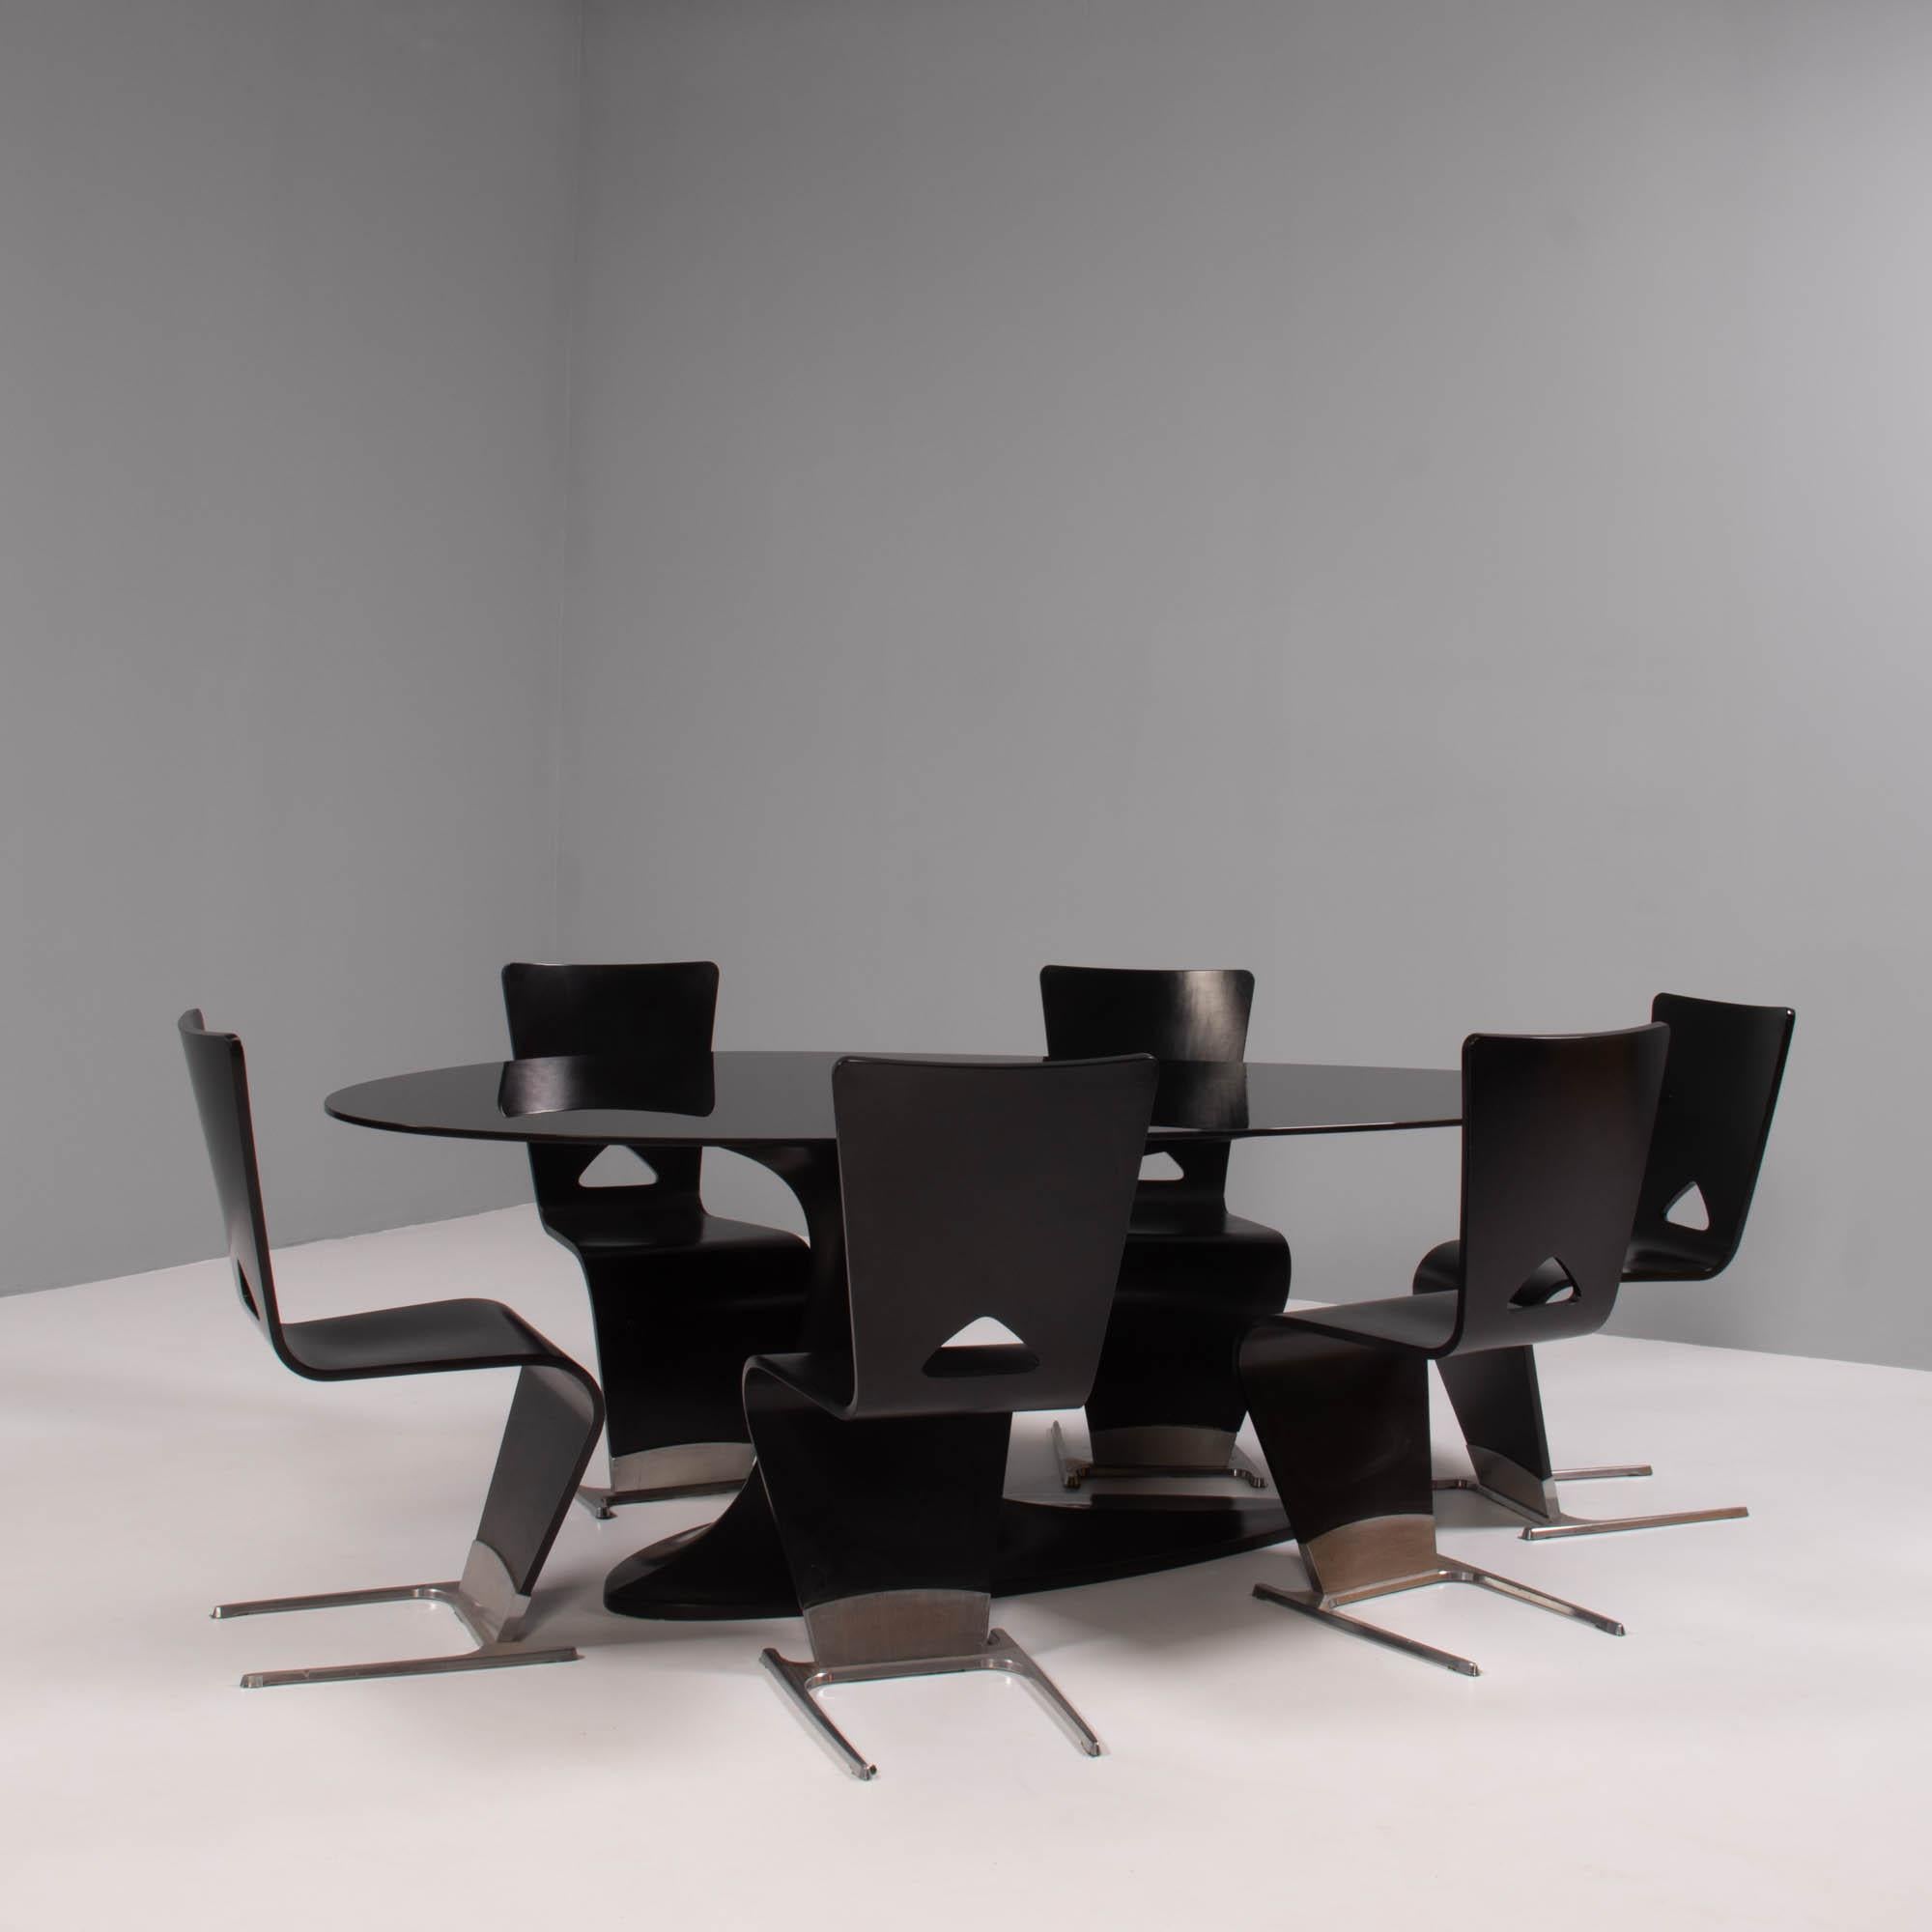 French Roche Bobois Black Dining Table and Six Chairs by Sacha Lakic, 2005